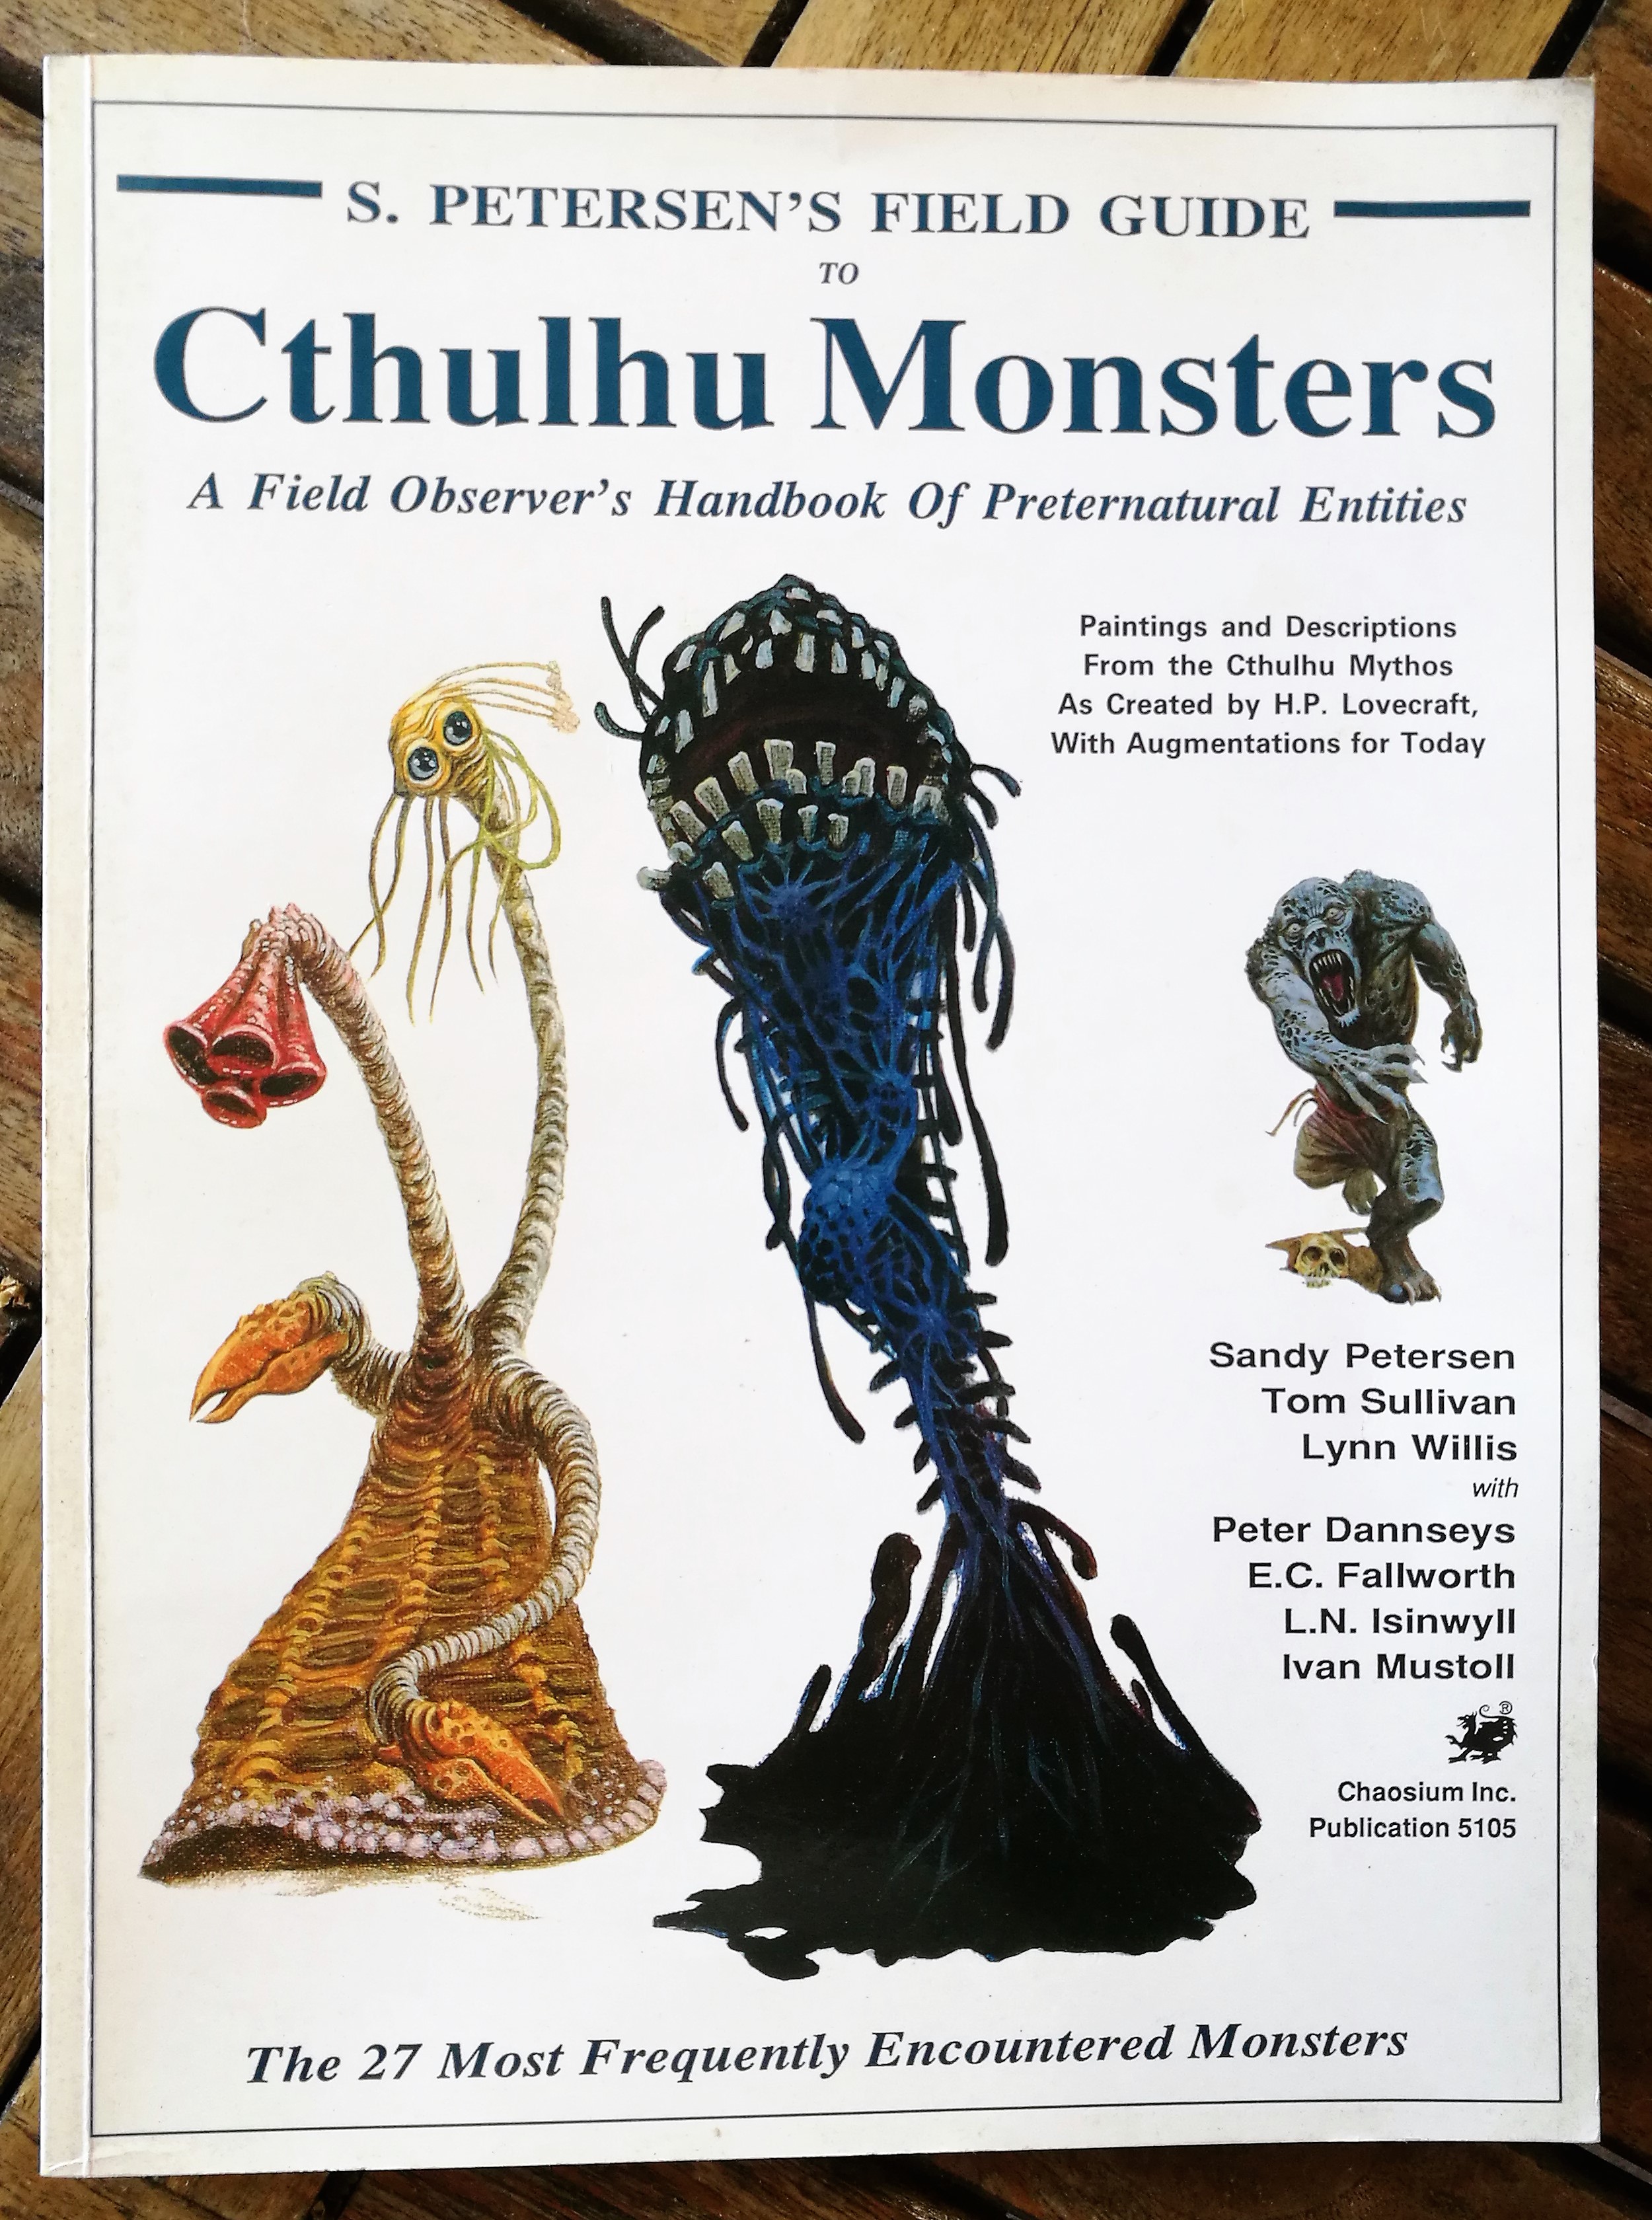 Petersen's Field Guide to Cthulhu Monsters